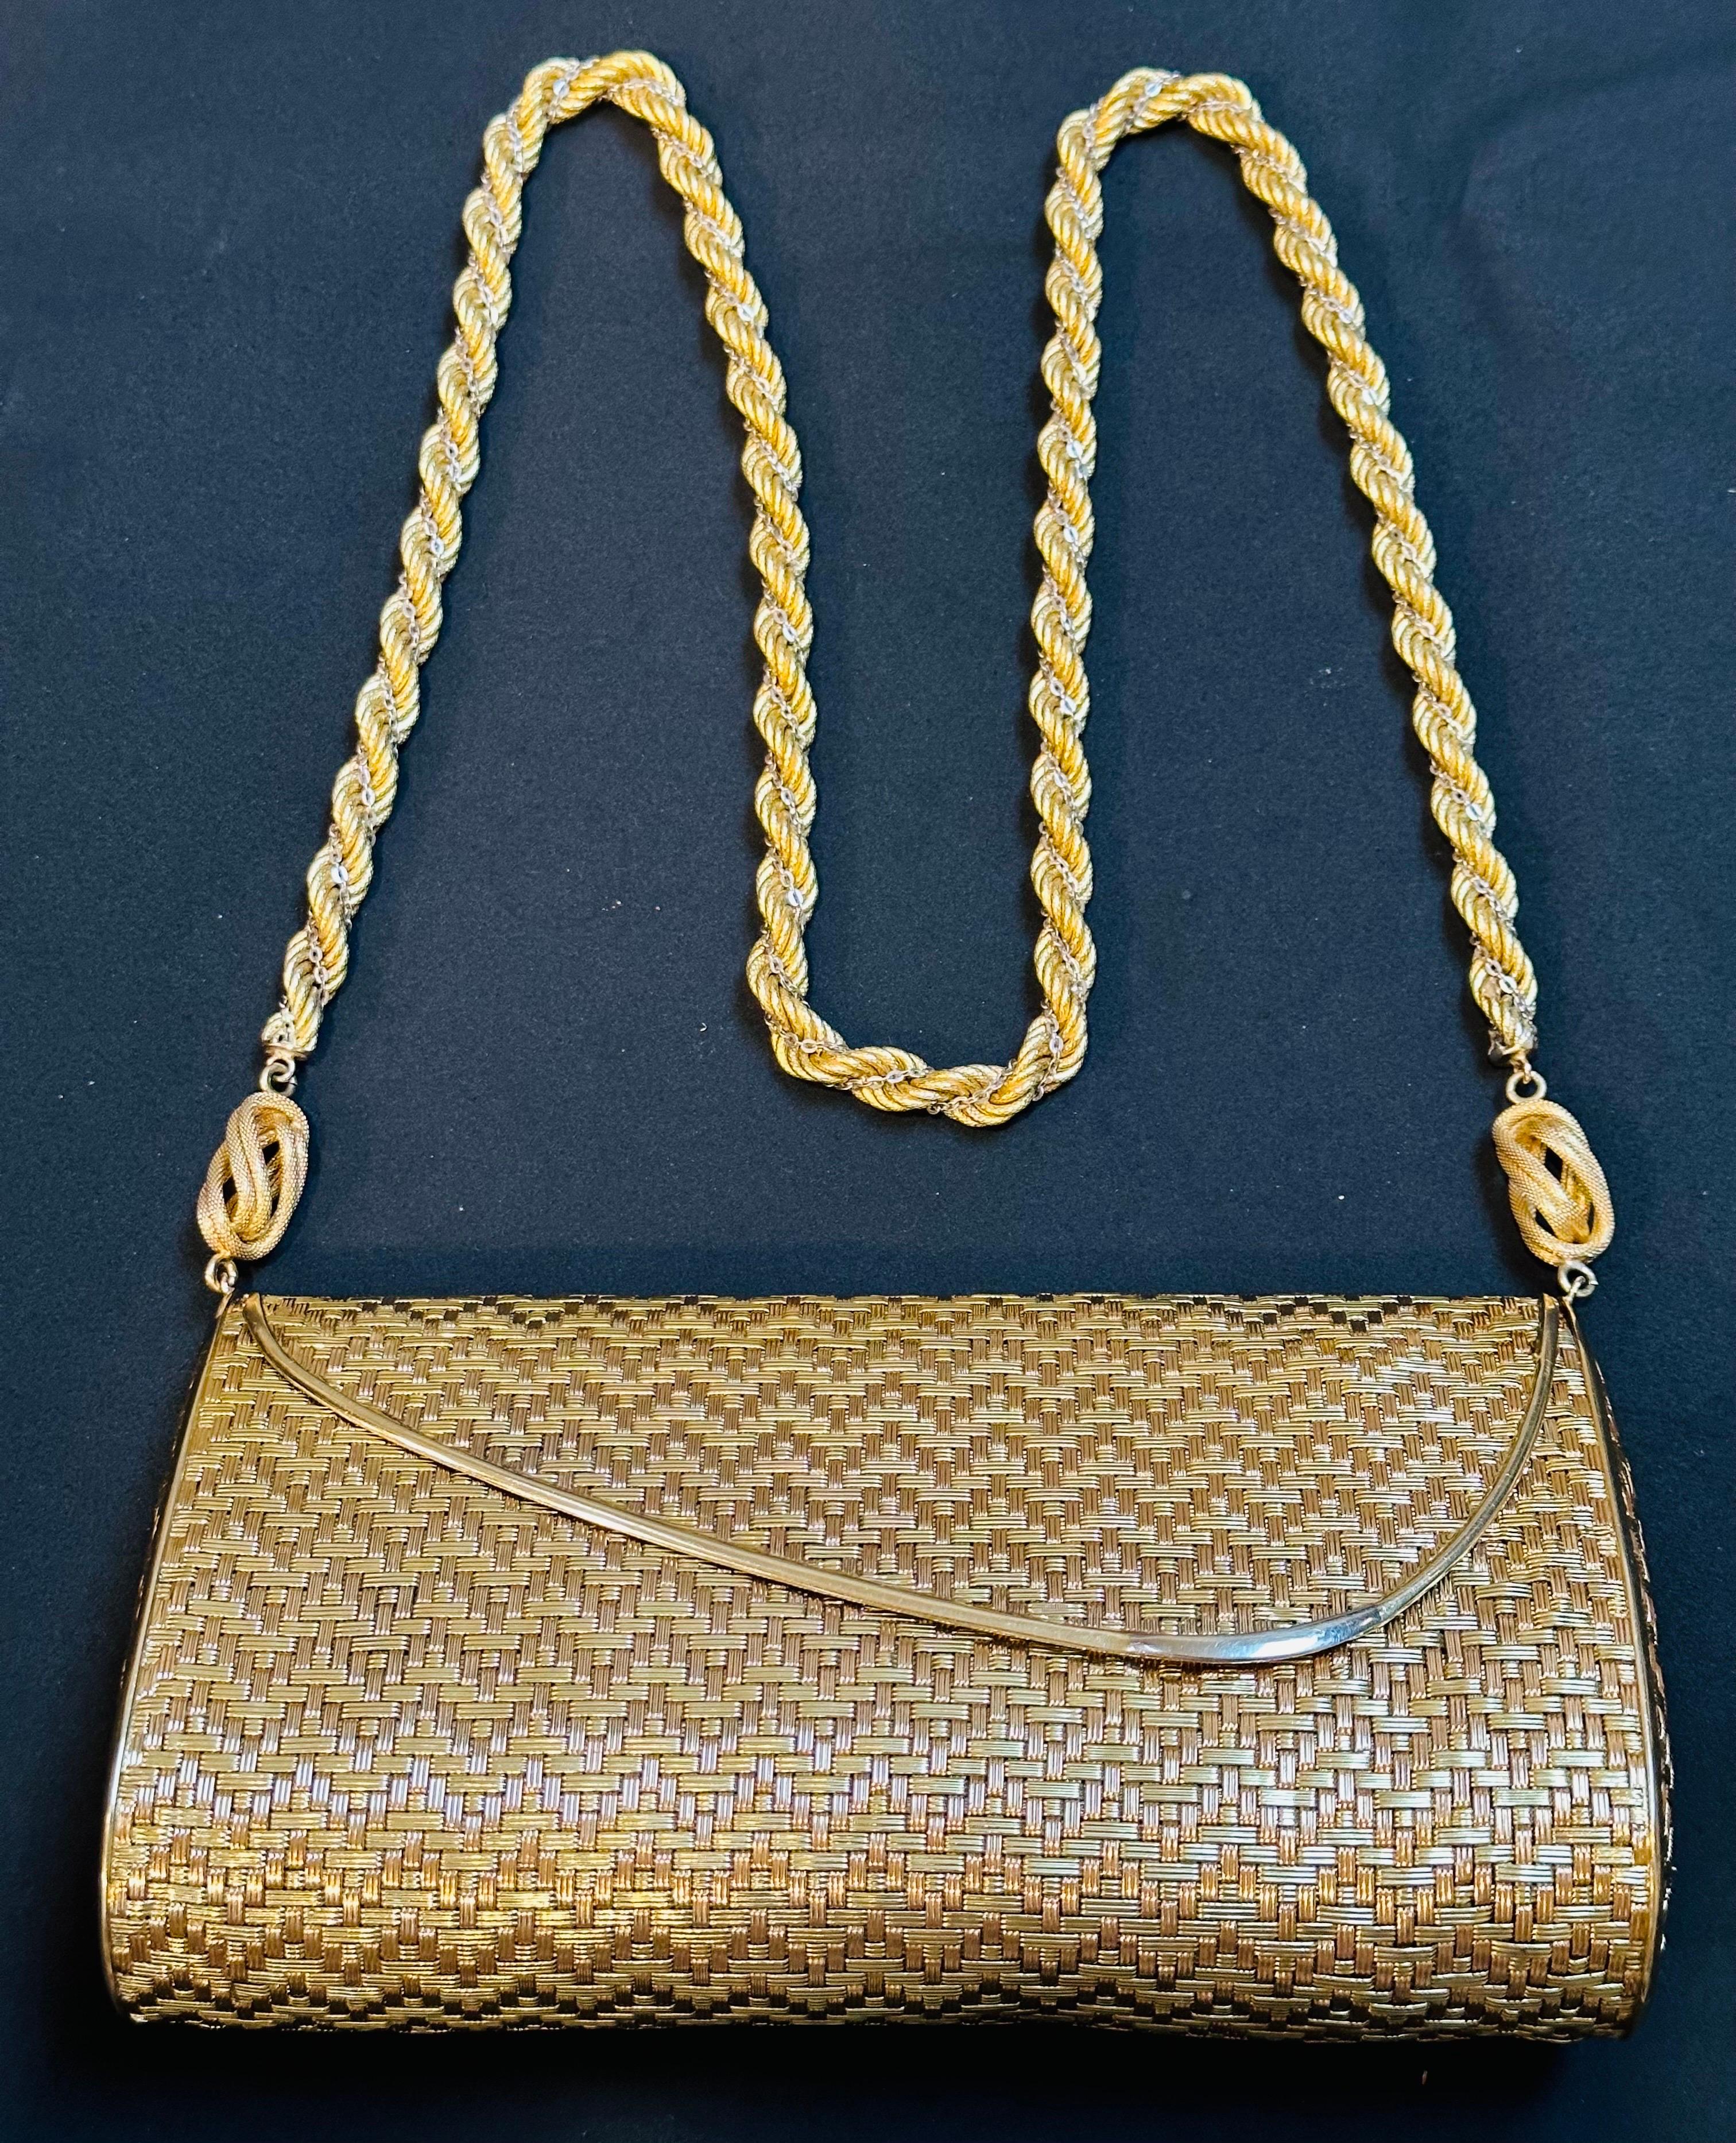 Cartier 18k Yellow Gold Mesh Purse Handbag with Shoulder Chain Rare 401 Gm For Sale 3